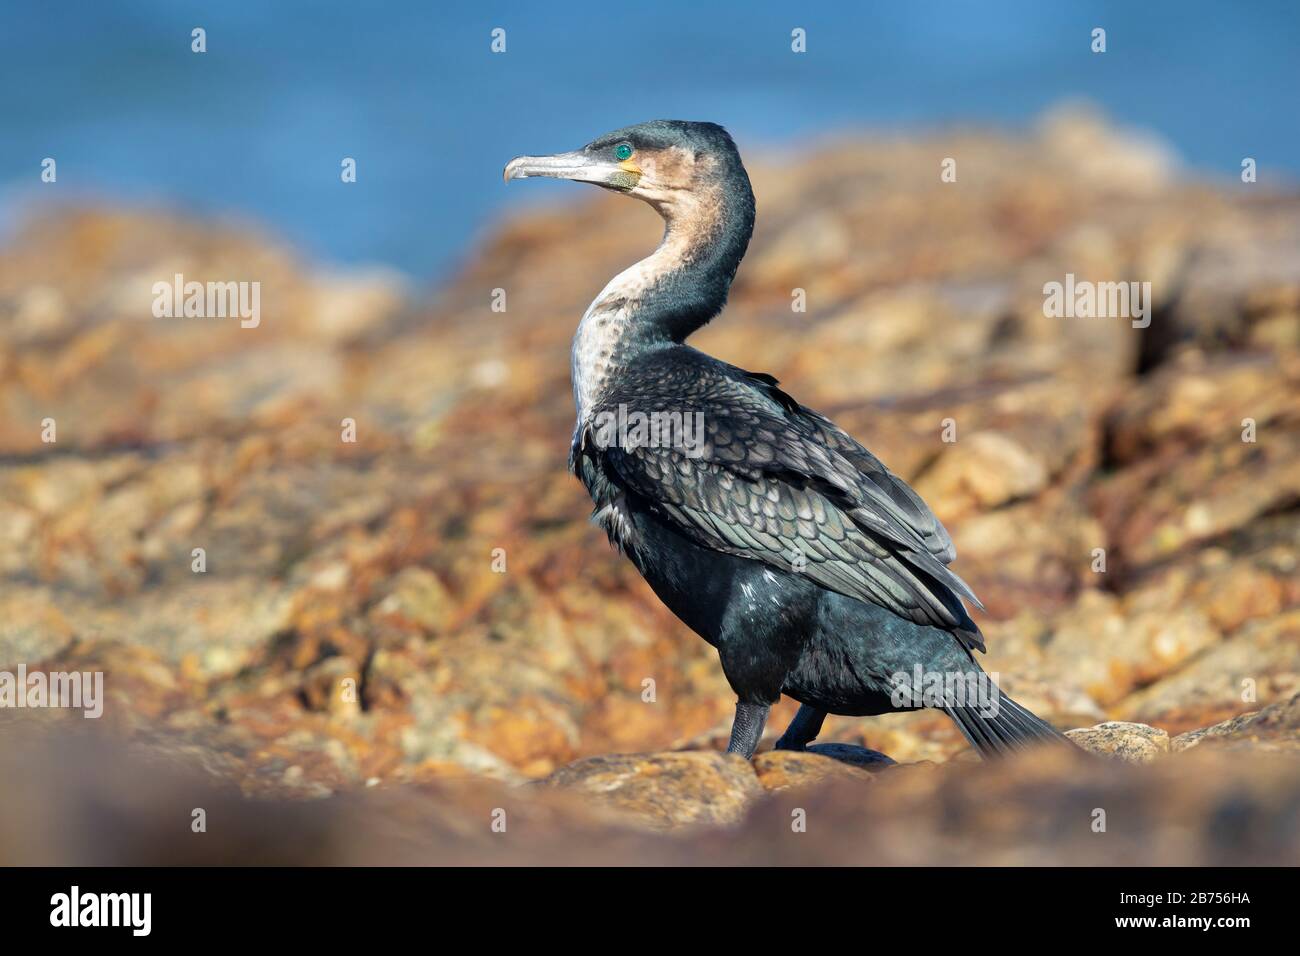 White-breasted Cormorant (Phalacrocorax lucidus), side vie wof an adult perched on a rock, Western Cape, South Africa Stock Photo